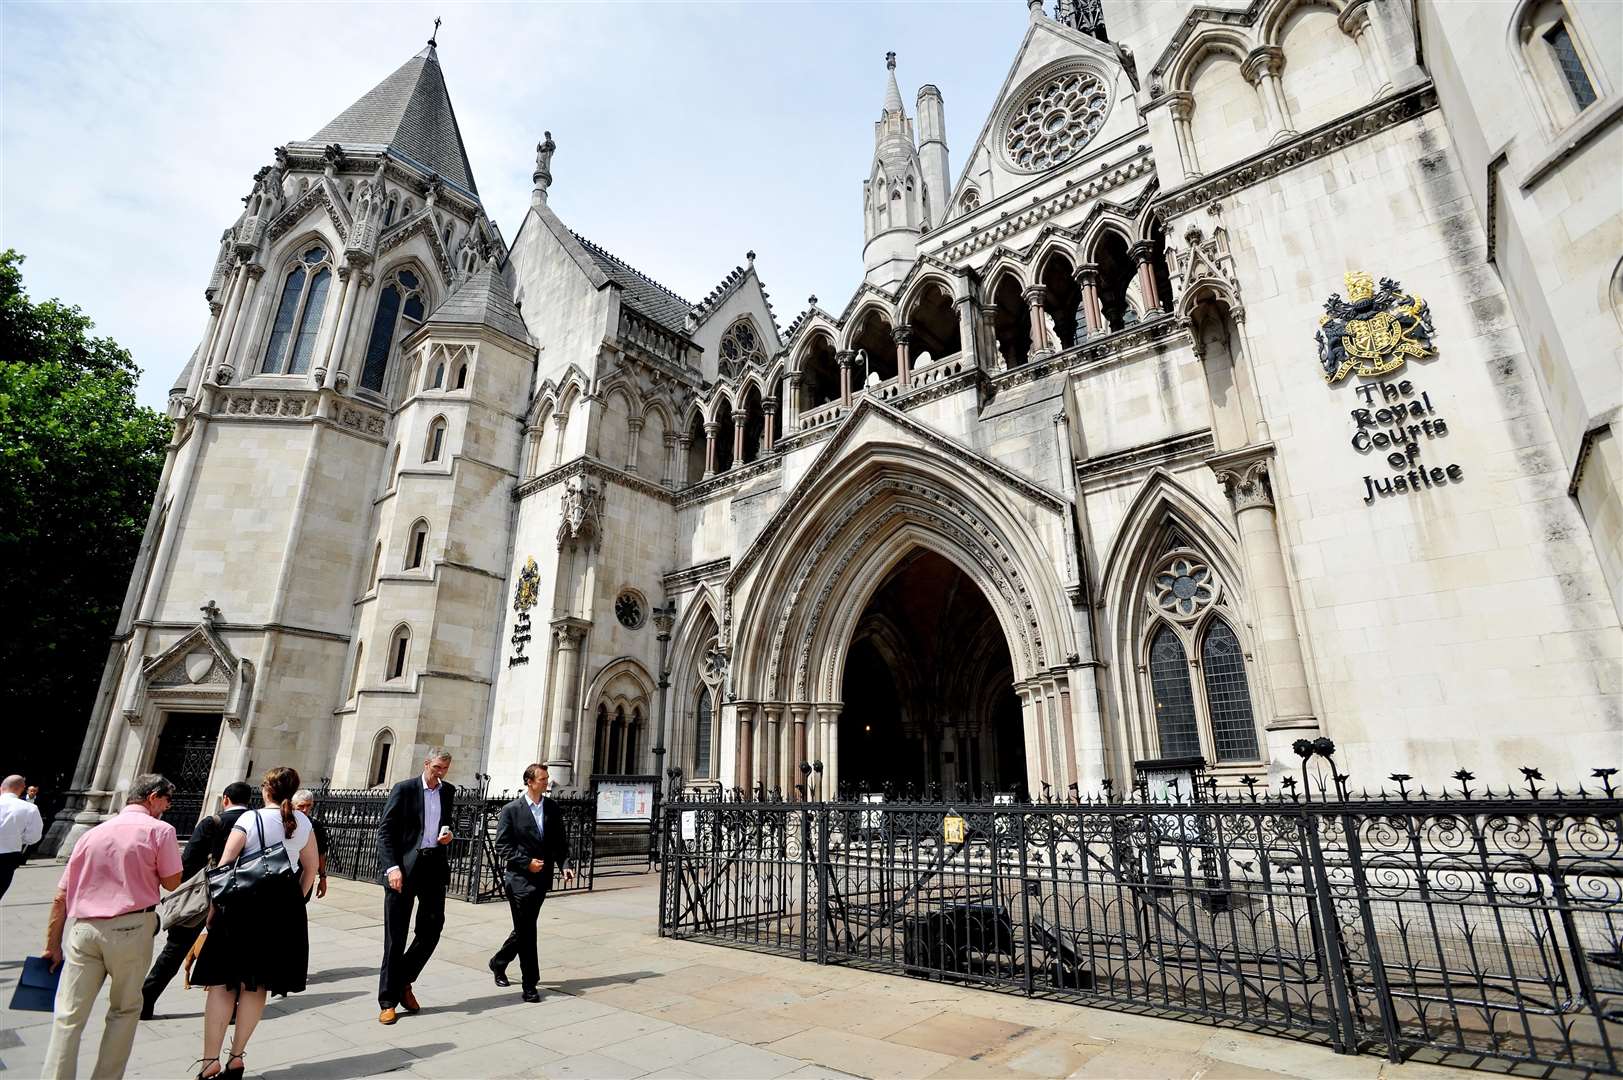 The pair’s cases were dismissed at the Royal Courts of Justice (Nick Ansell/PA)